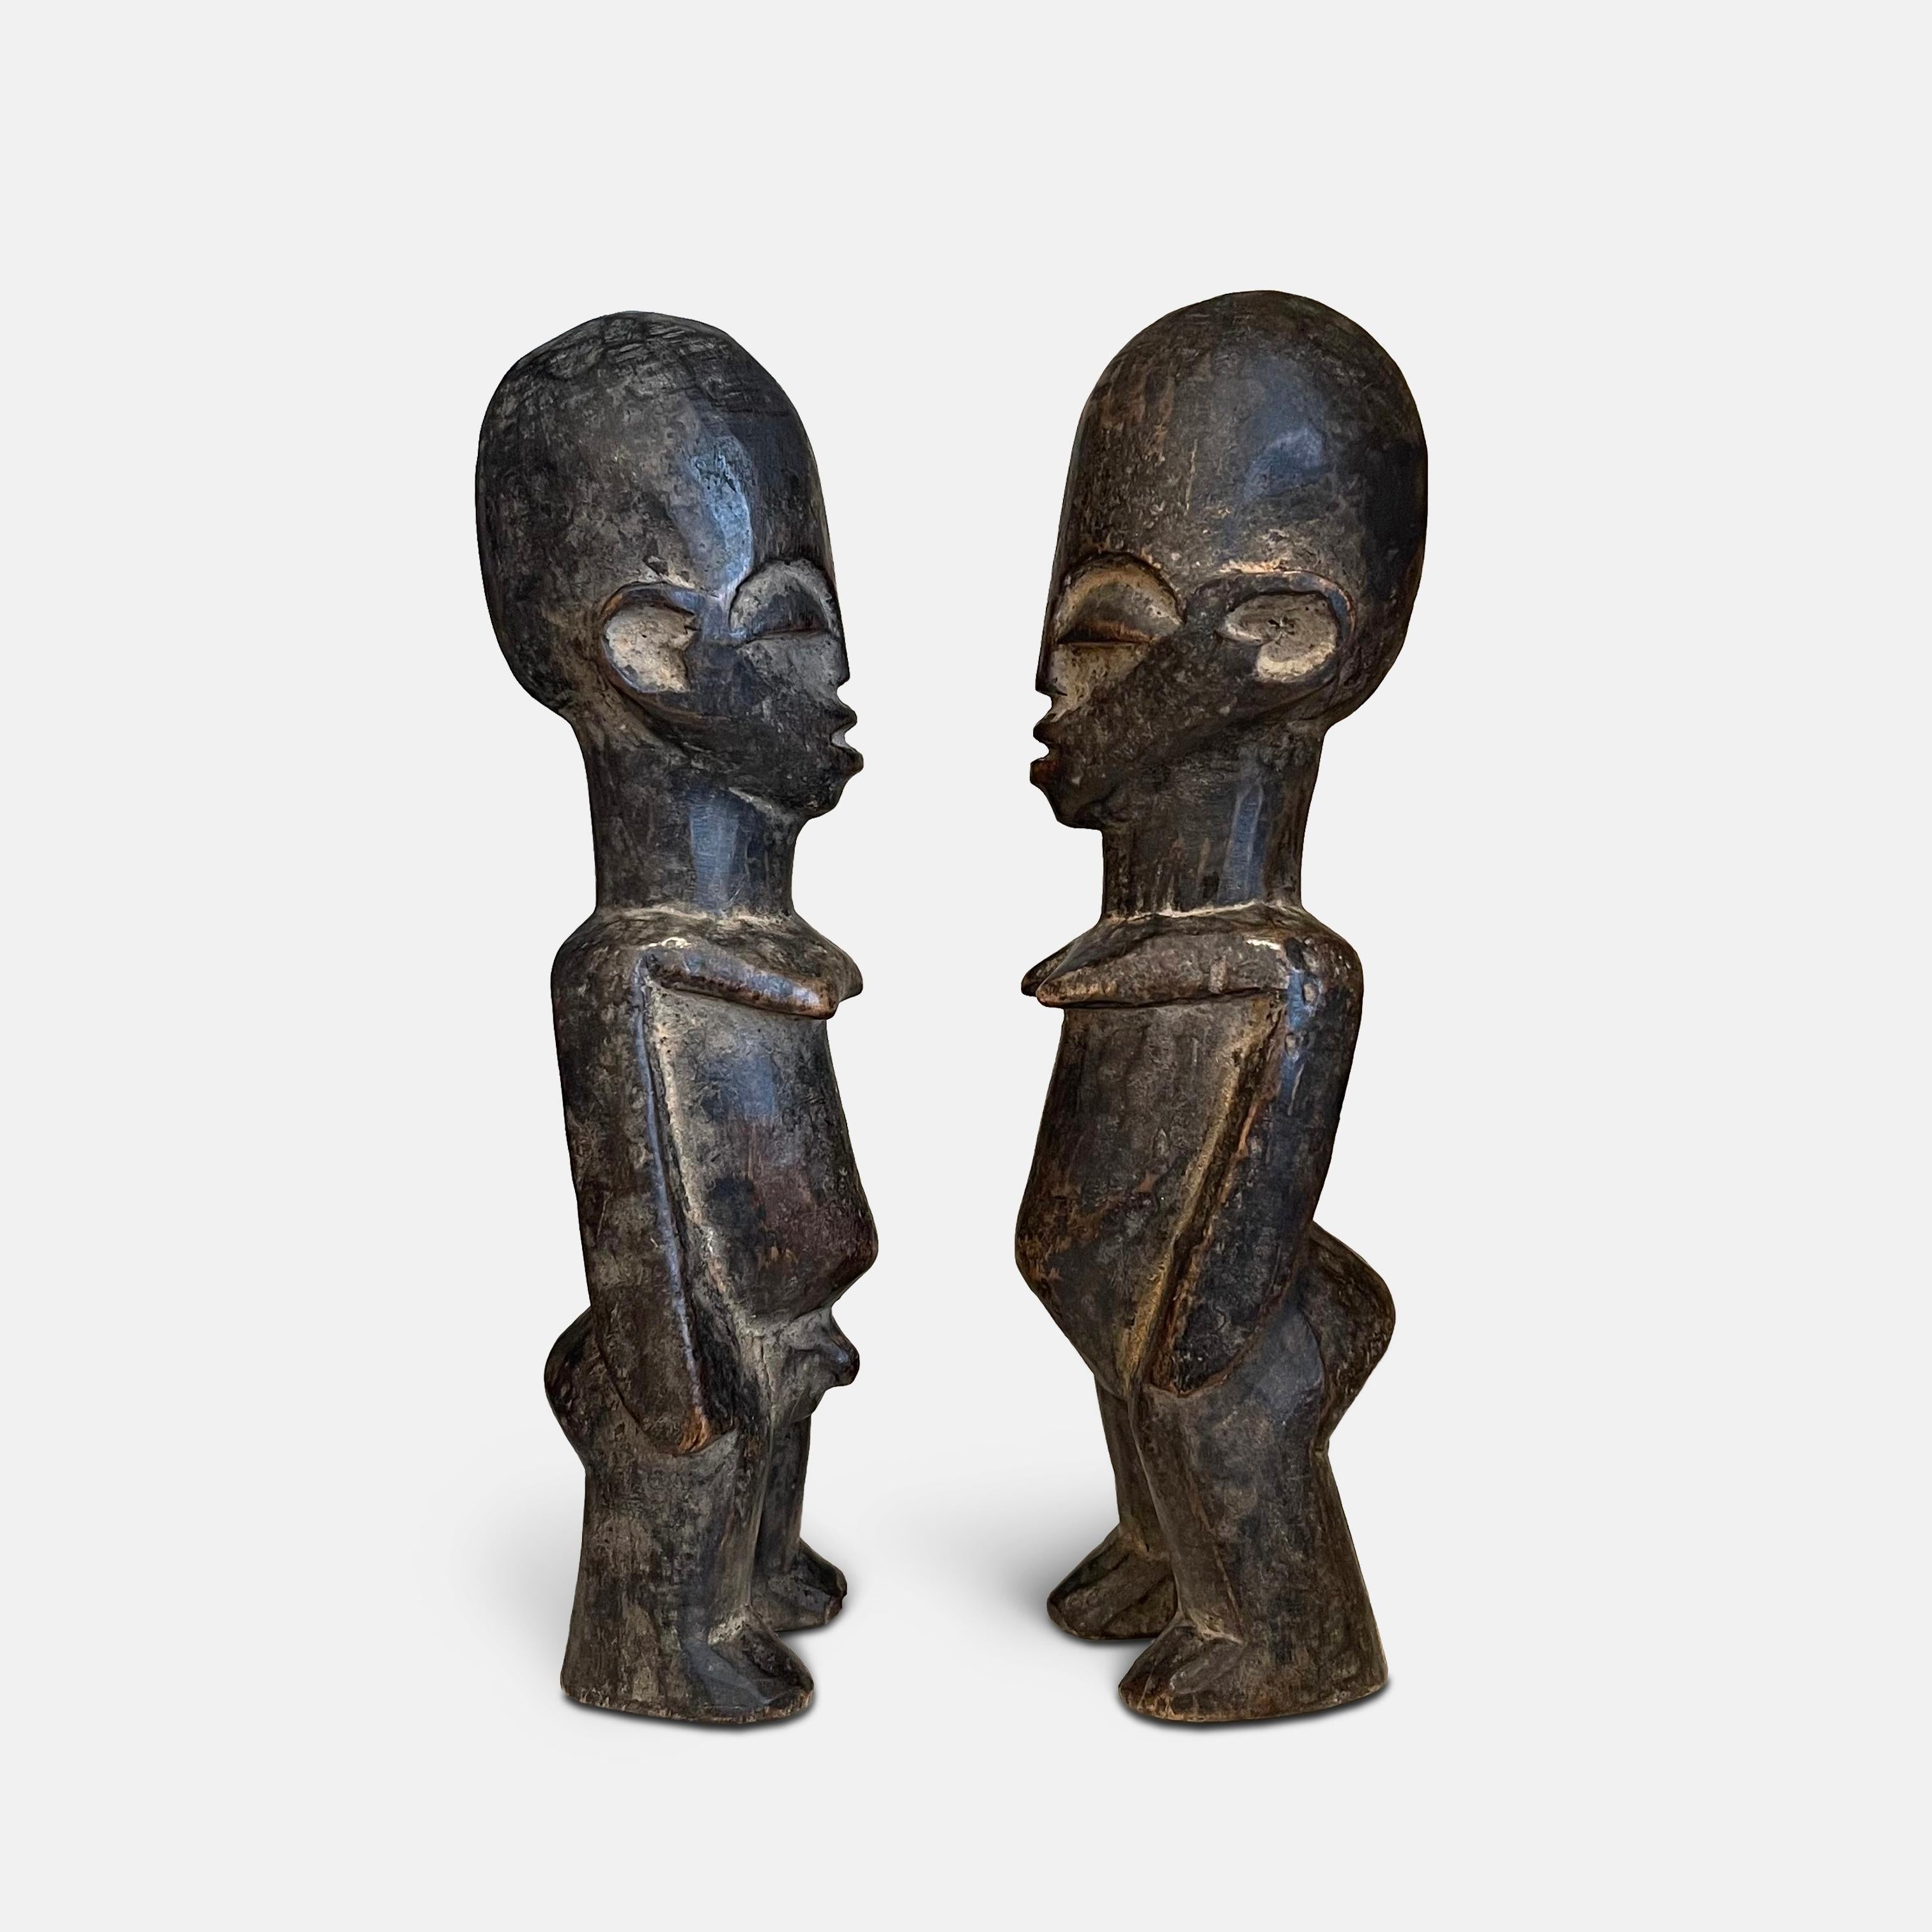 These paired statues, one male and one female figure, show a beautiful patina of use to the hard and dense wood. Made by the Lobi Birifor people of Burkina Faso, near the frontier with Ghana, they are a type of wooden carved figure known as